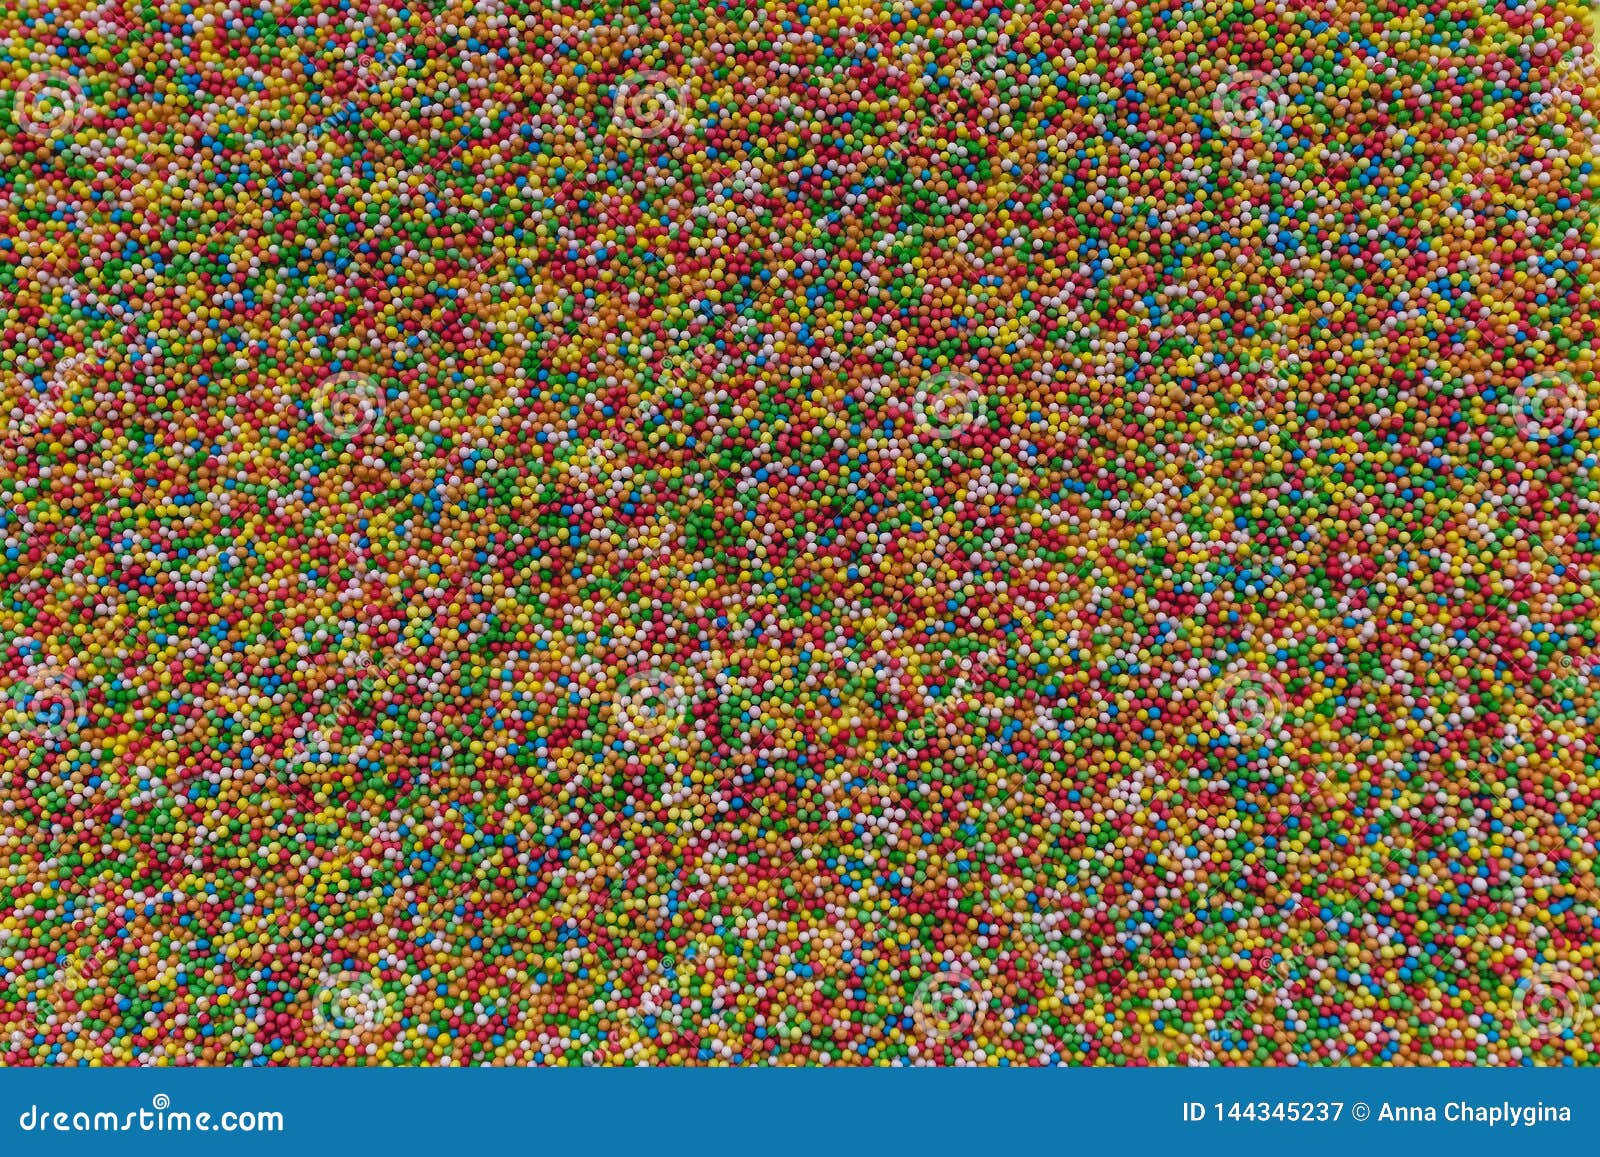 Colorful Rainbow Sprinkles Background Stock Image - Image of color ...